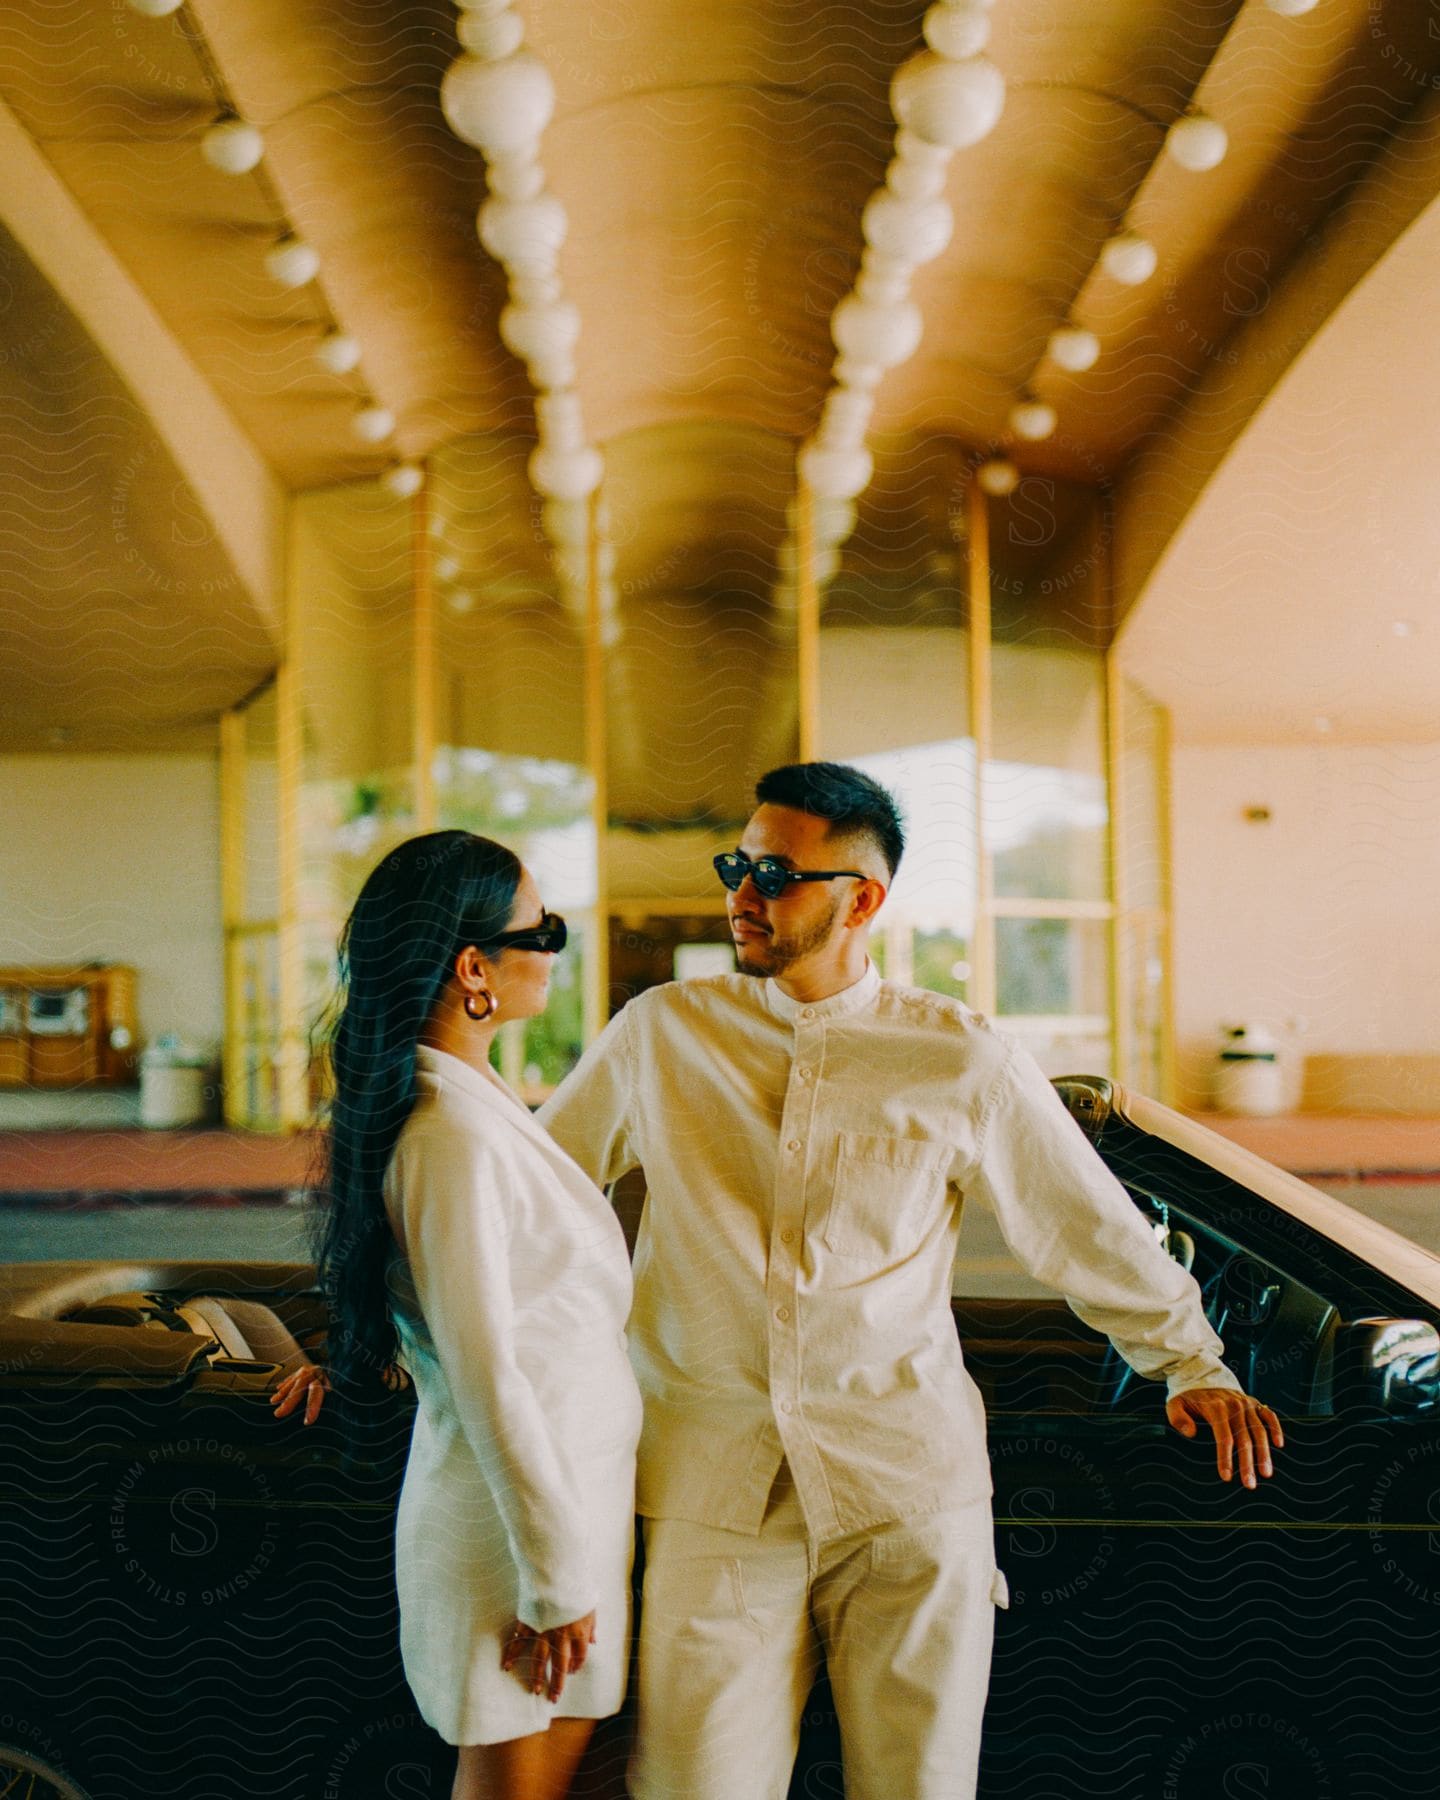 A man and a woman wearing white clothes and sunglasses are looking into each others faces as they stand inside a large room as he leans against furniture